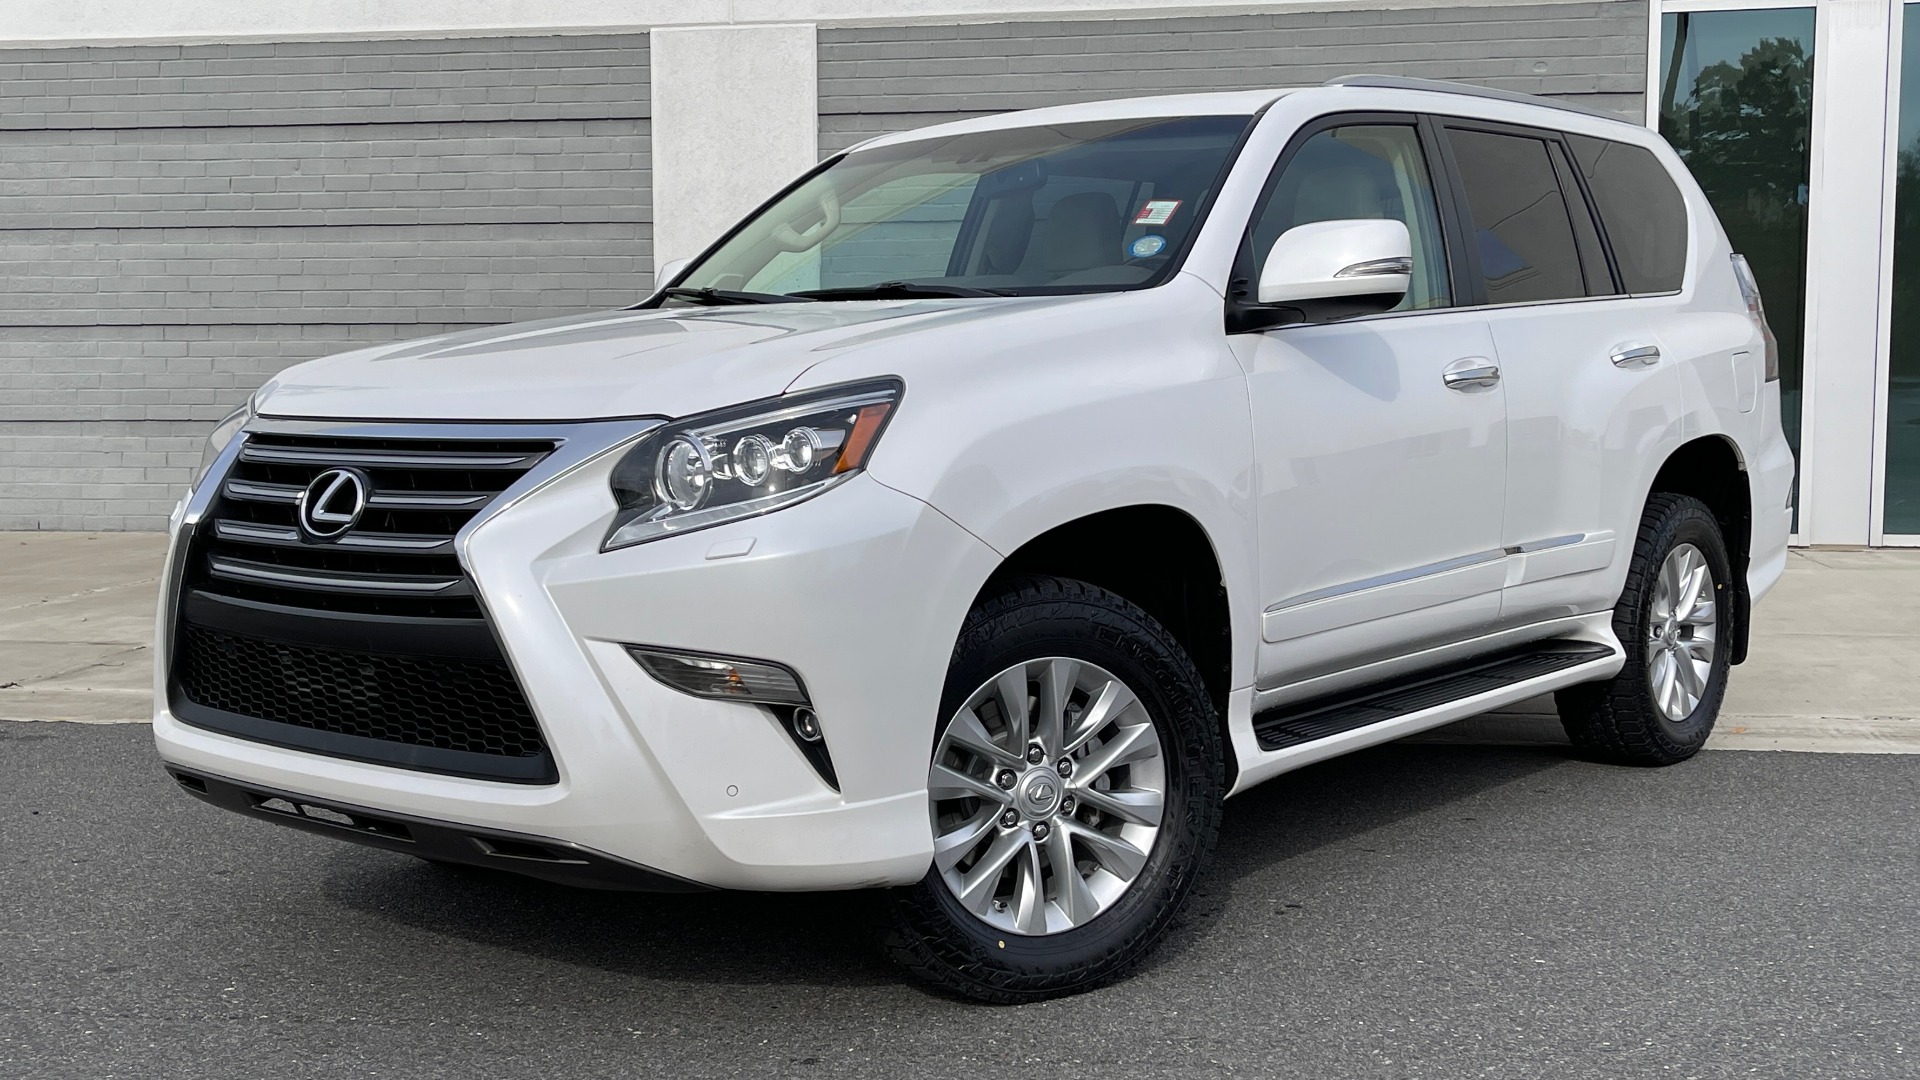 Used 2016 Lexus GX 460 PREMIUM / BLIND SPOT W/CROSS TRAFFIC ALERT / SUNROOF / REARVIEW for sale Sold at Formula Imports in Charlotte NC 28227 1